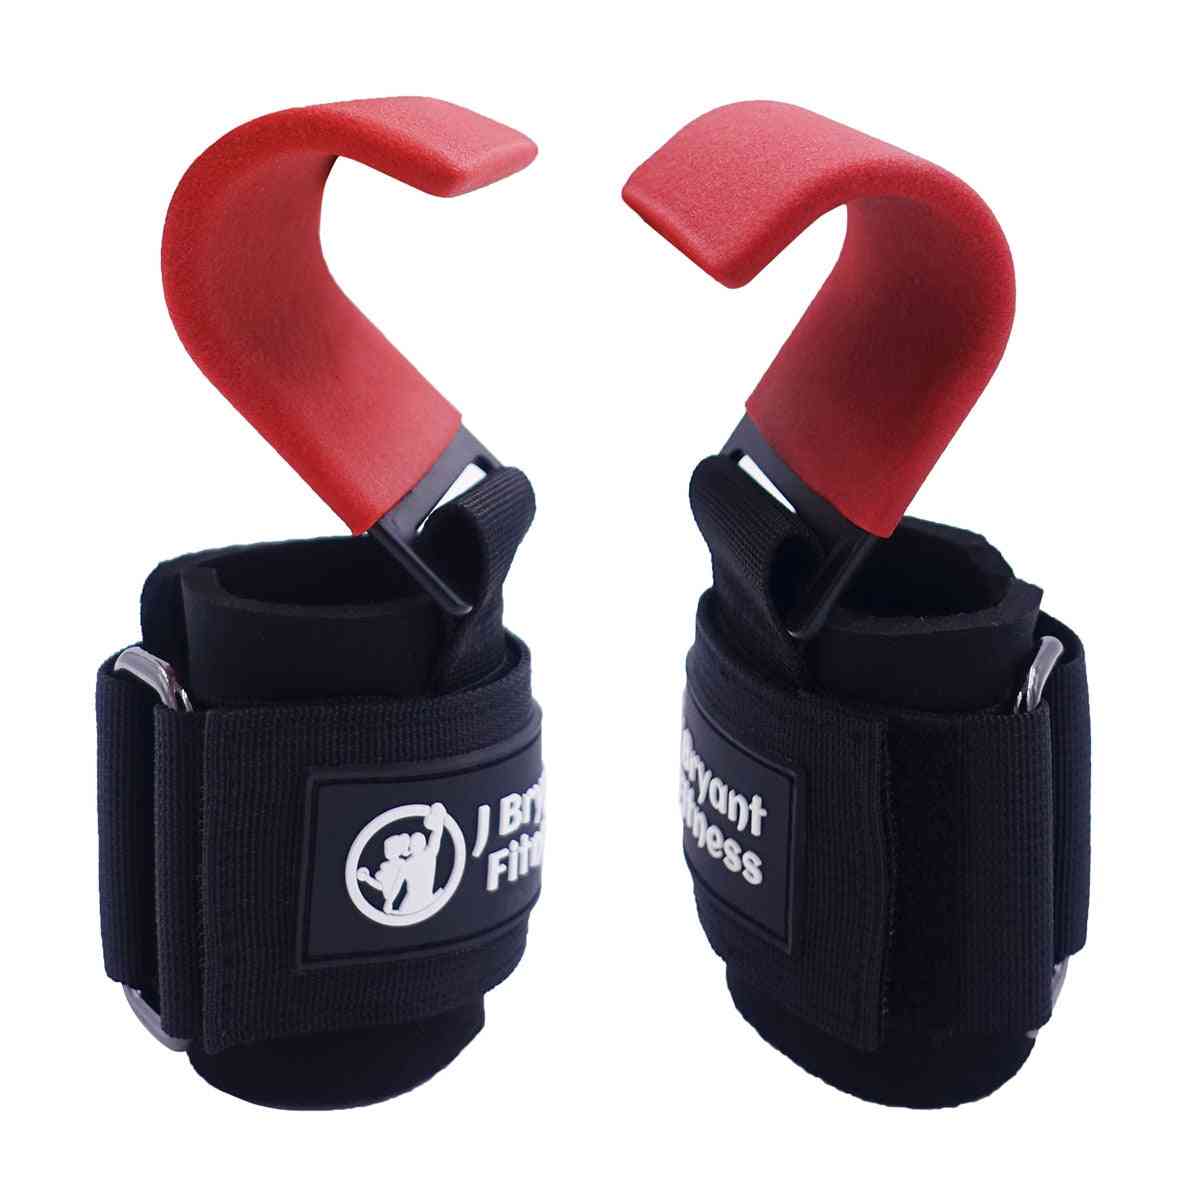 Gym Hook, Weights Dumbbells Weightlifting Sports Gloves Support For Barbell